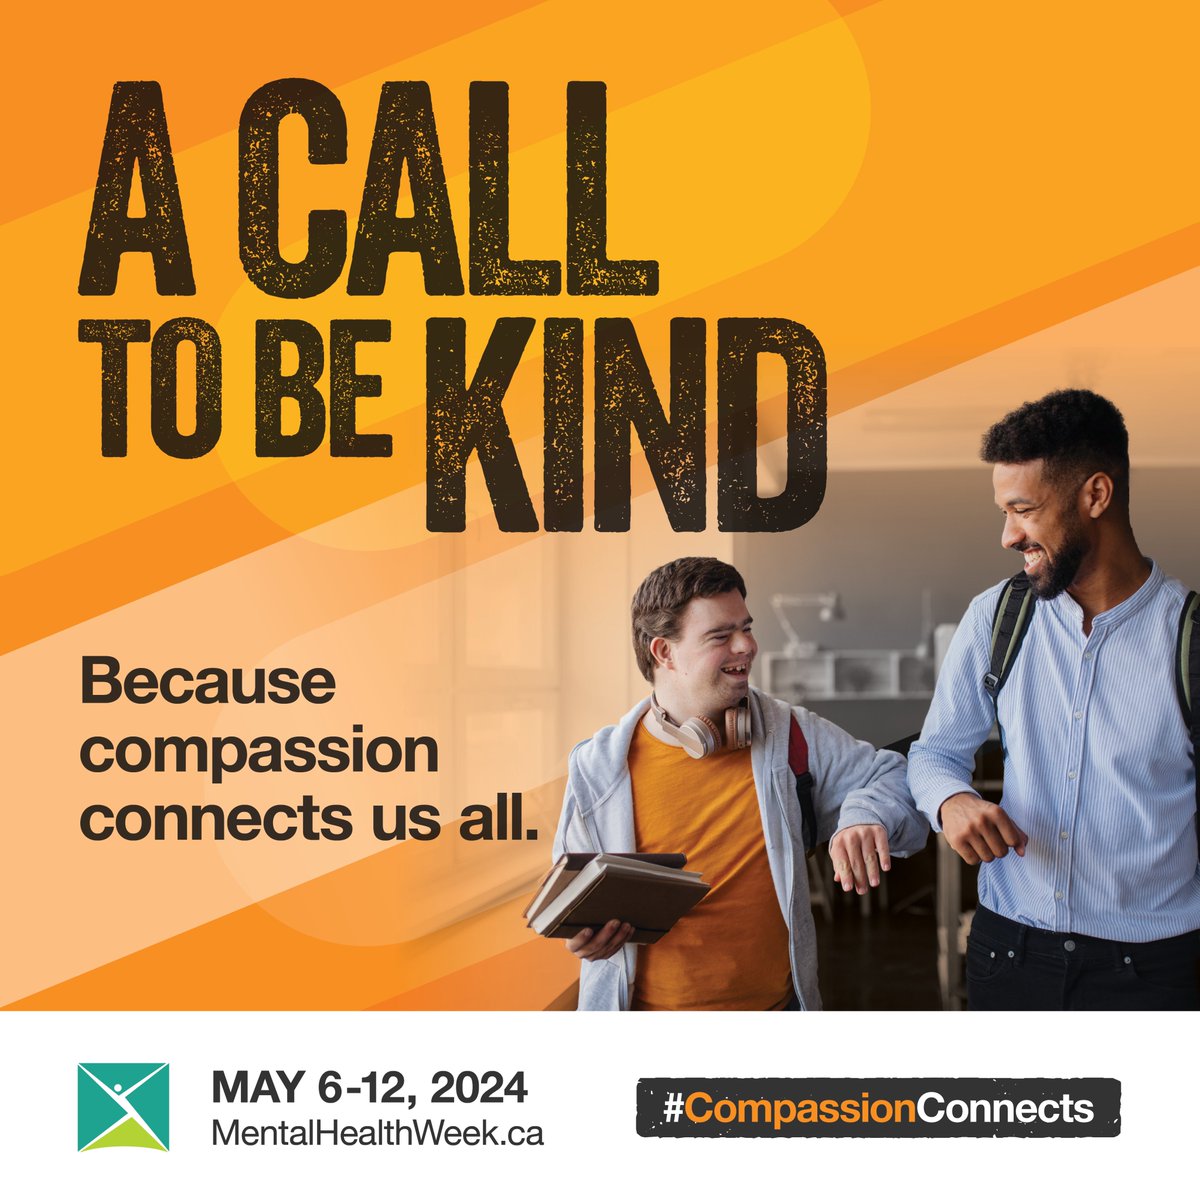 #DYK that giving compassion feels as good as receiving it! Researchers found that when we extend kindness, our bodies release oxytocin, the 'feel-good' hormone. #MentalHealthWeek #CompassionConnects